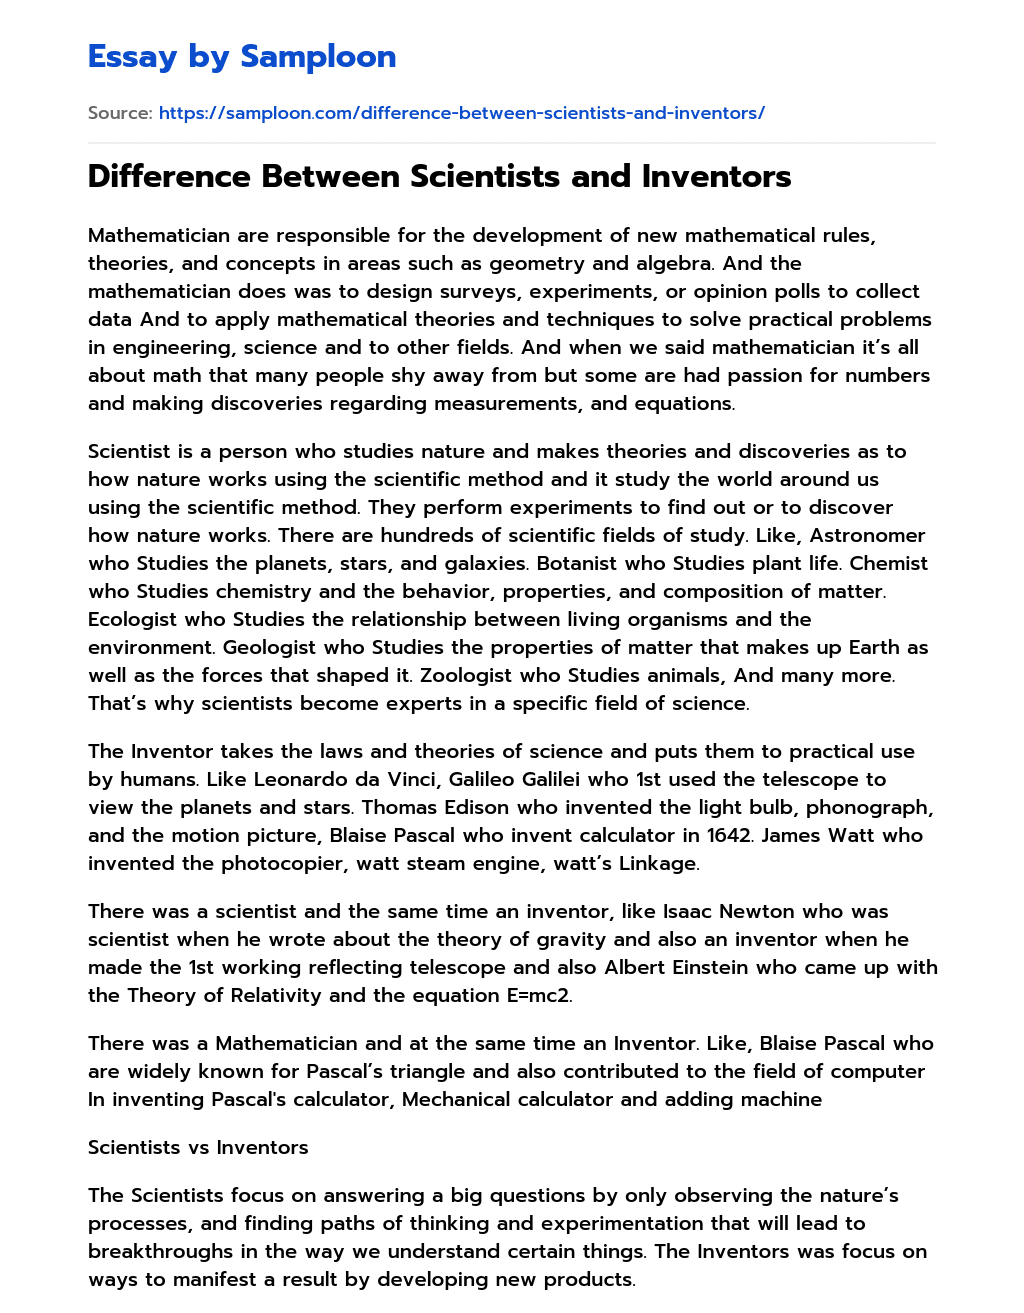 Difference Between Scientists and Inventors essay